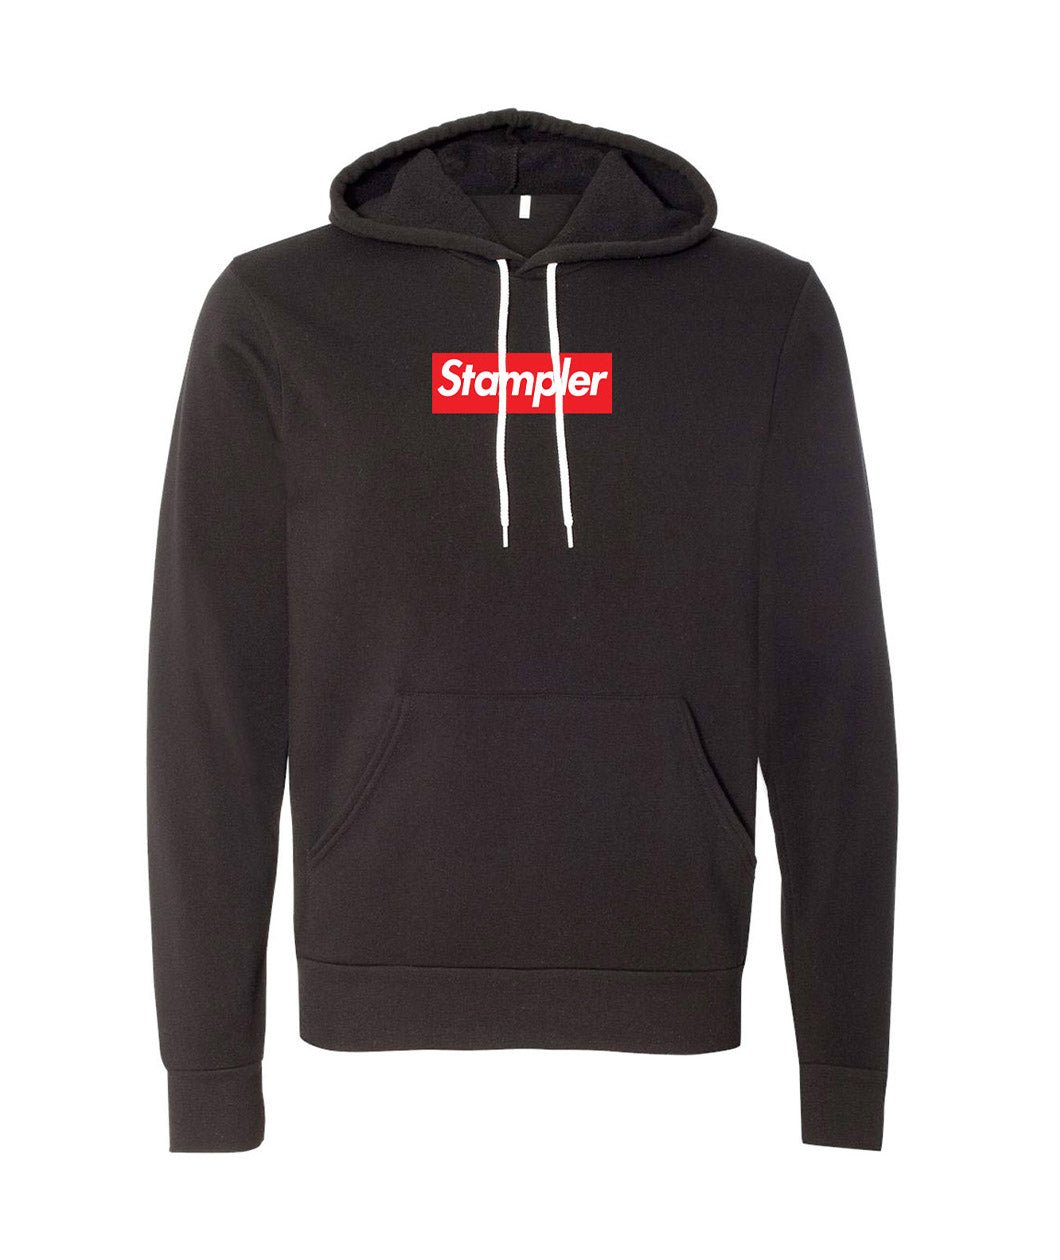 Black hoodie with white draw strings and red screenprinted rectangle in the middle with white words 